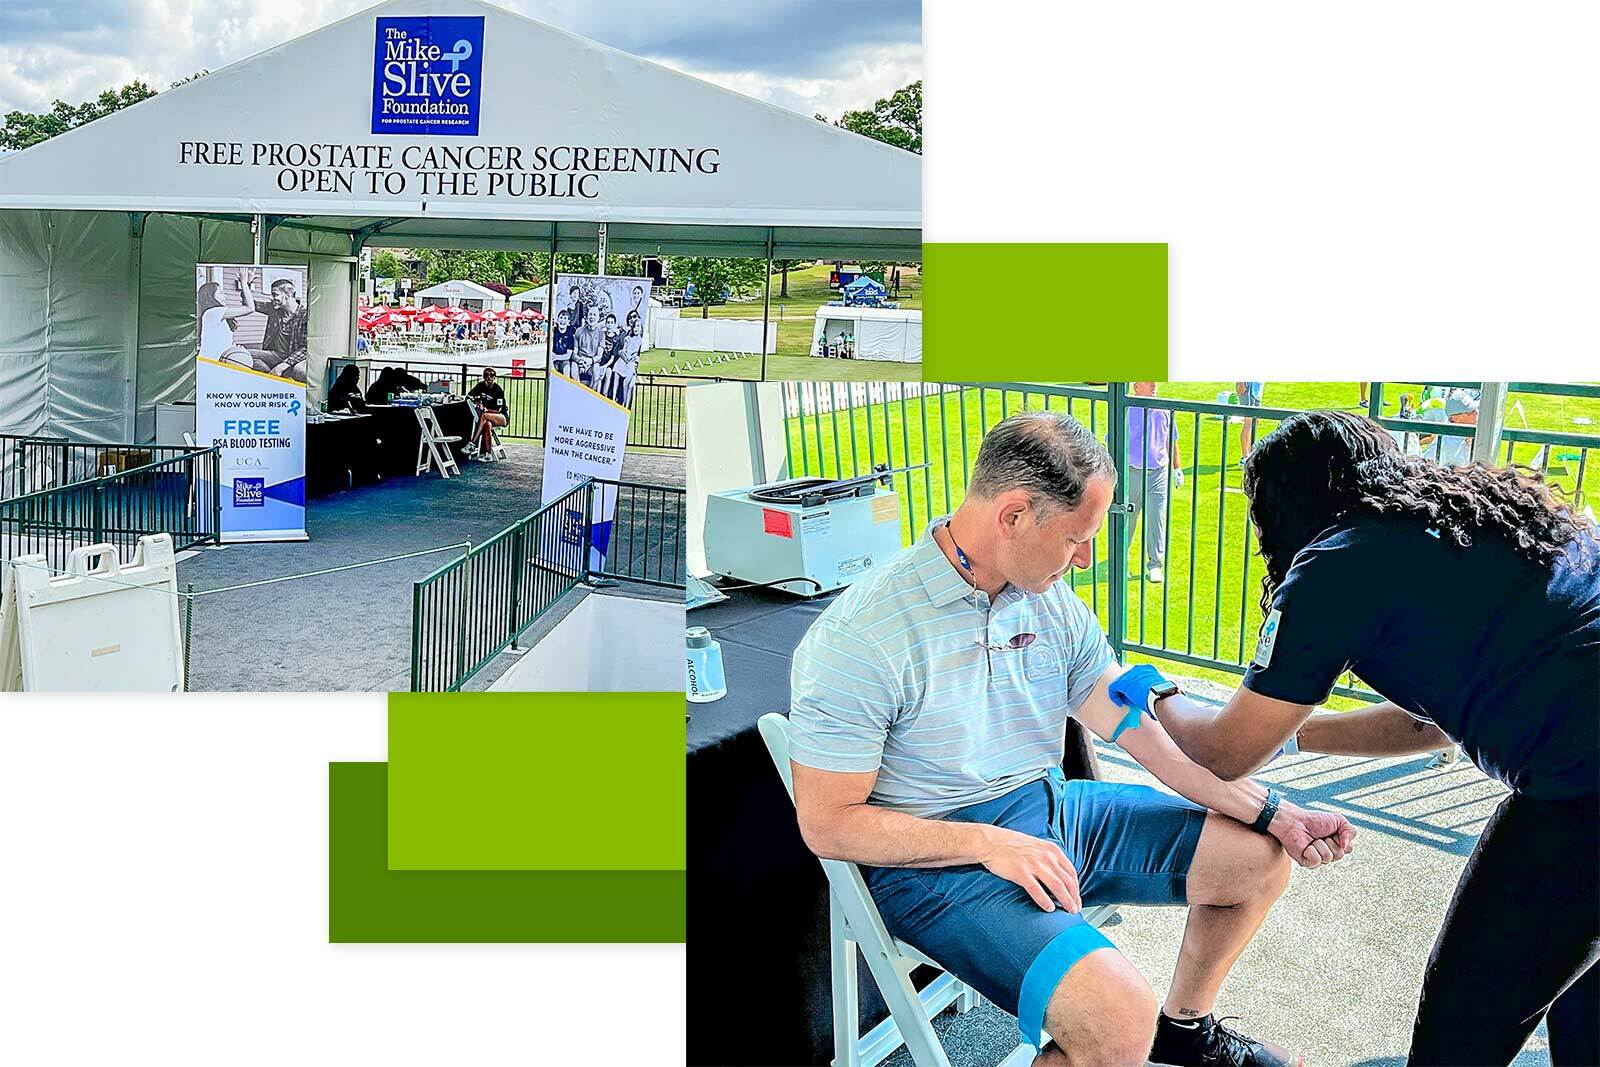 Collage - on the left closeup of the tent from The Mike Slive Foundation event, and on the right, the person is getting tested for prostate cancer